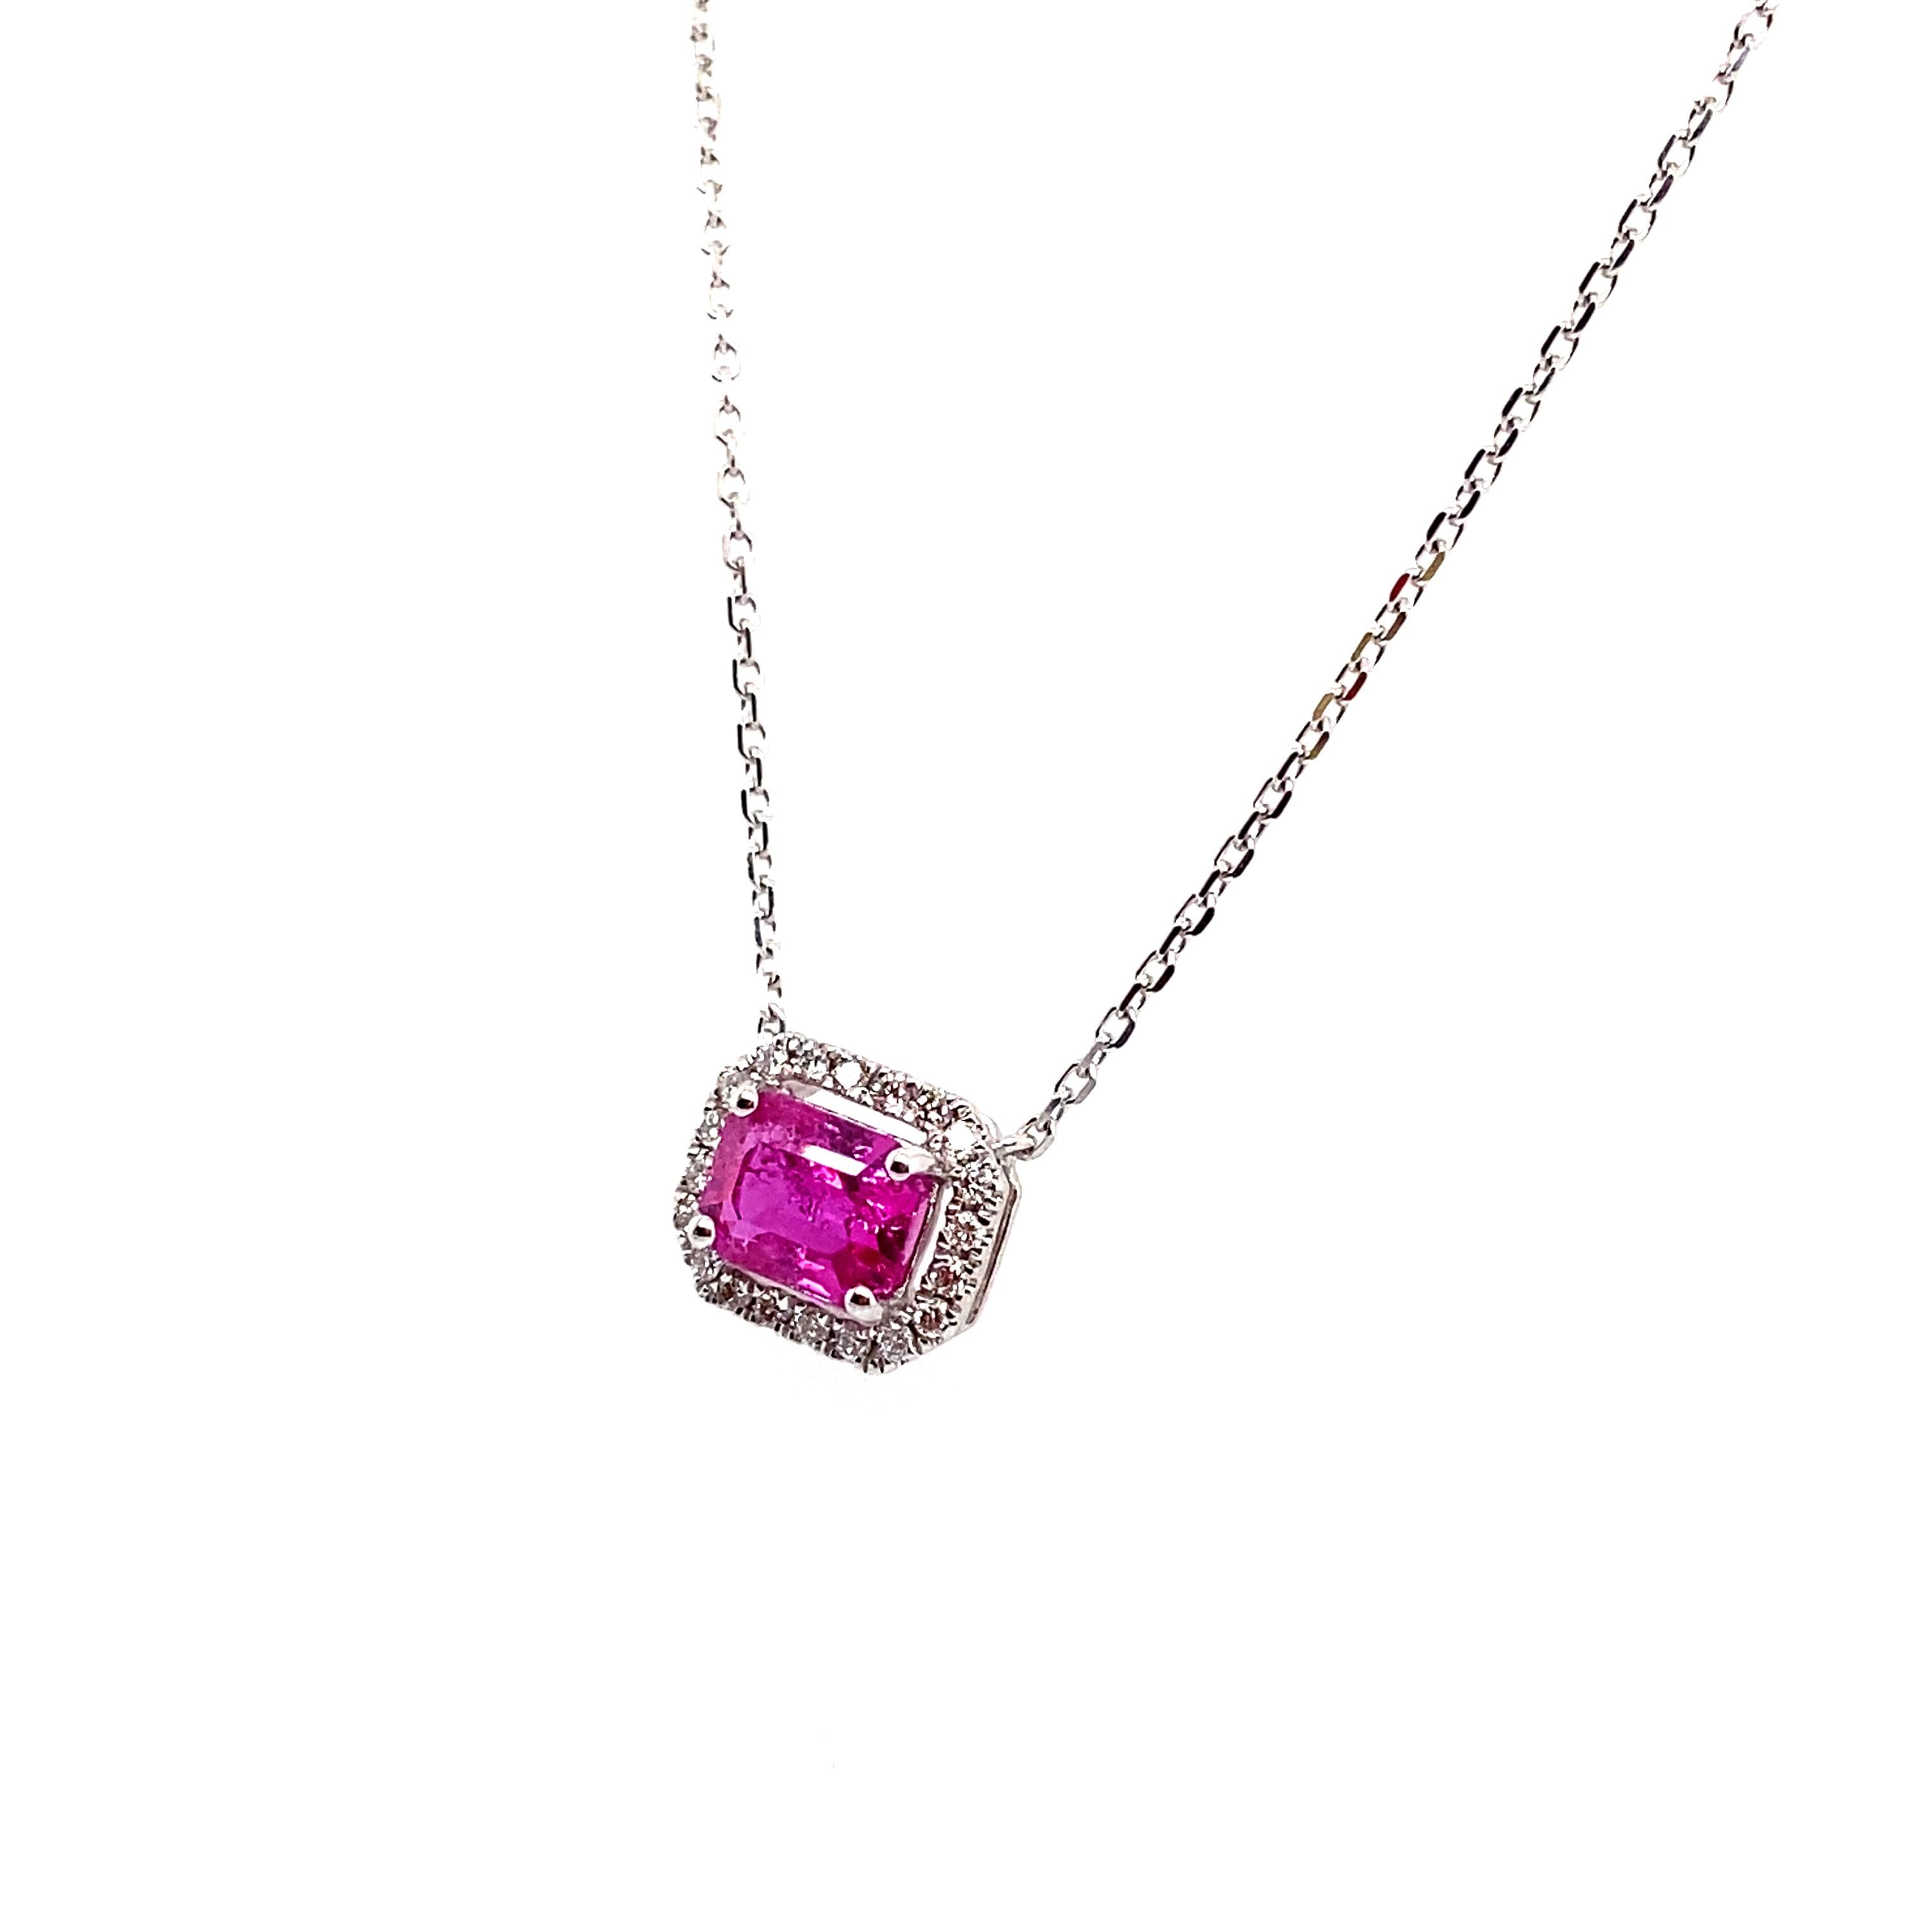 Women's or Men's 1.22 Carat Octagon-Cut Burma No Heat Ruby and White Diamond Pendant Necklace For Sale